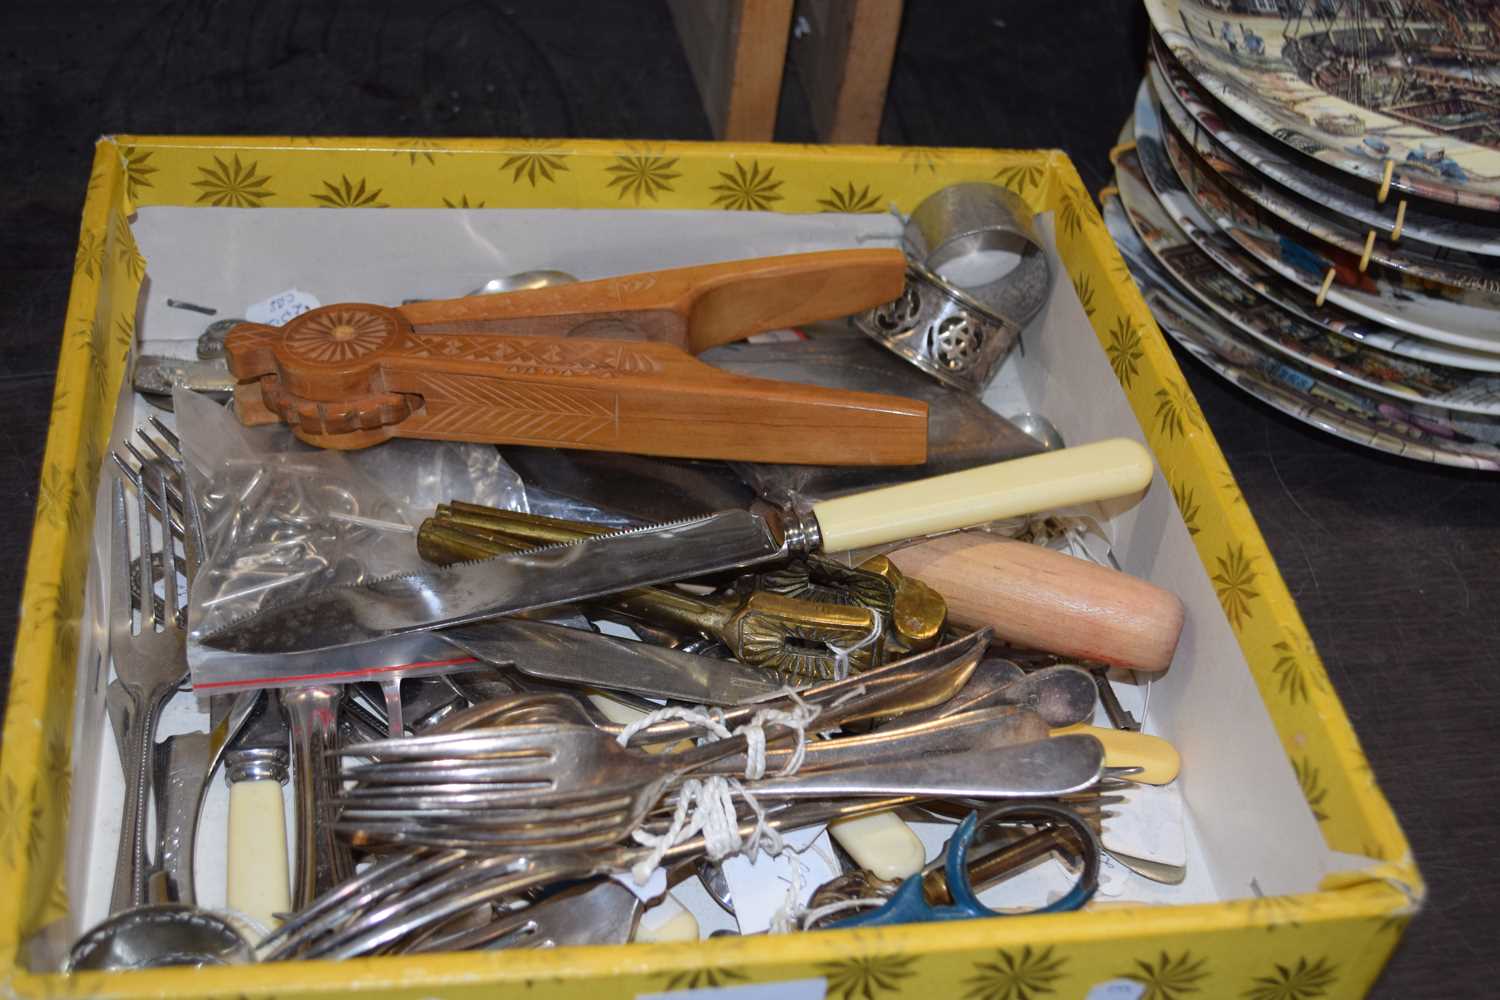 Quantity of assorted flat ware